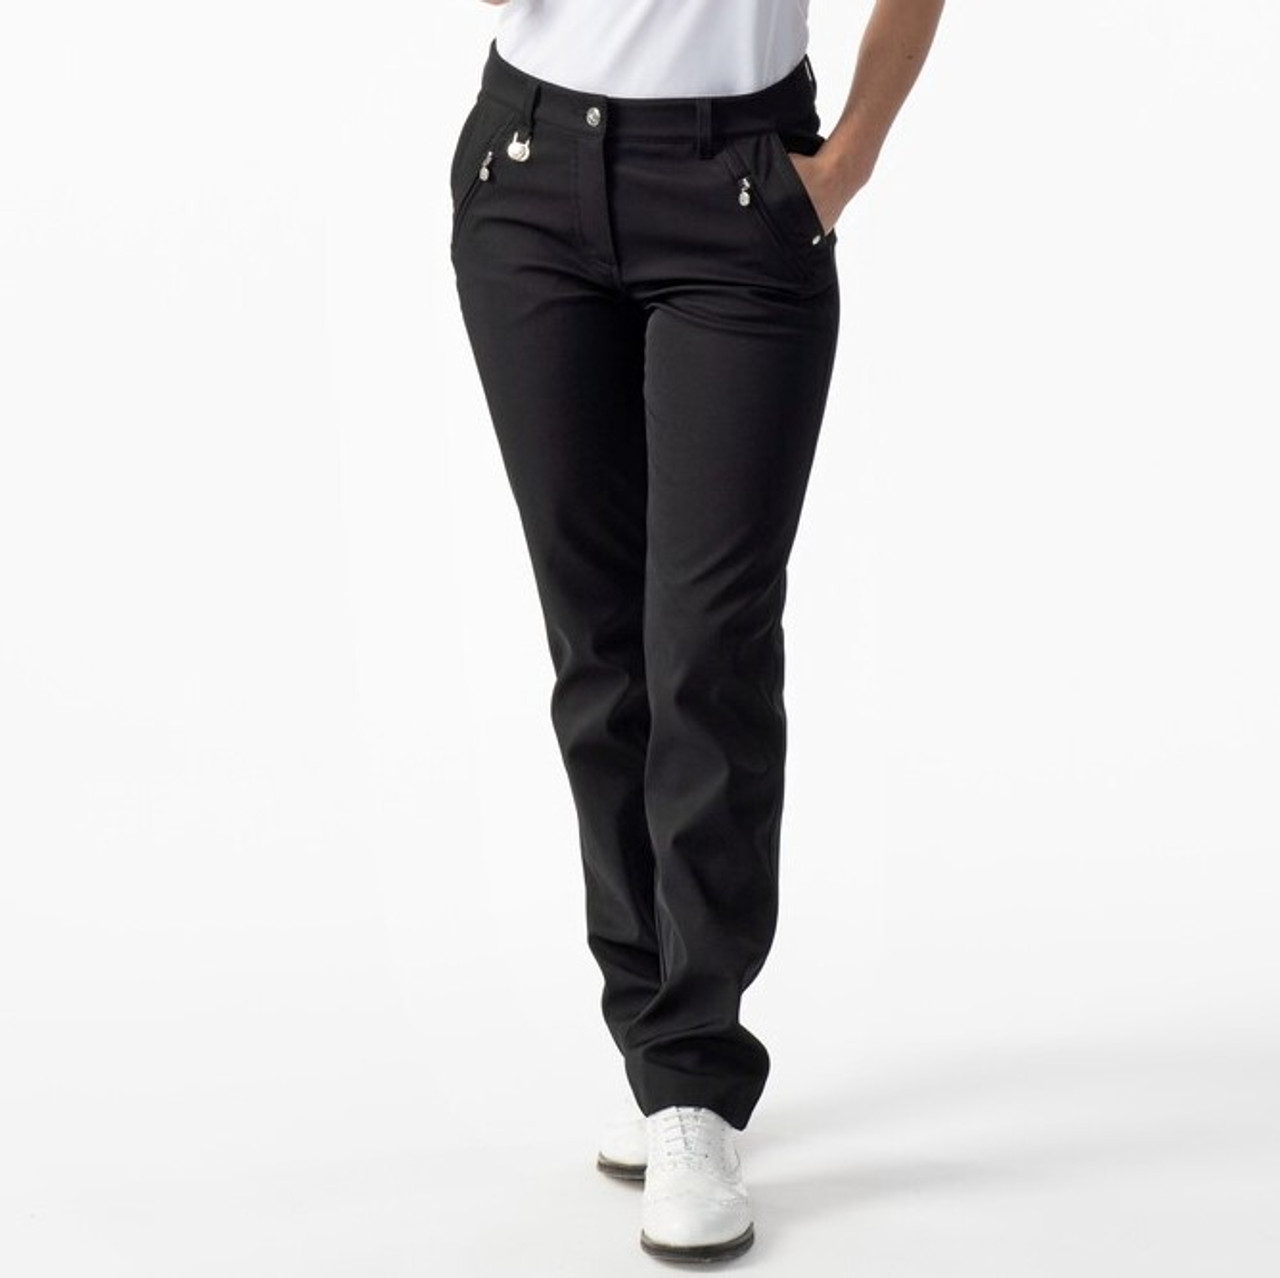 Women's Black Stretch Pants, Made In Canada, On Sale